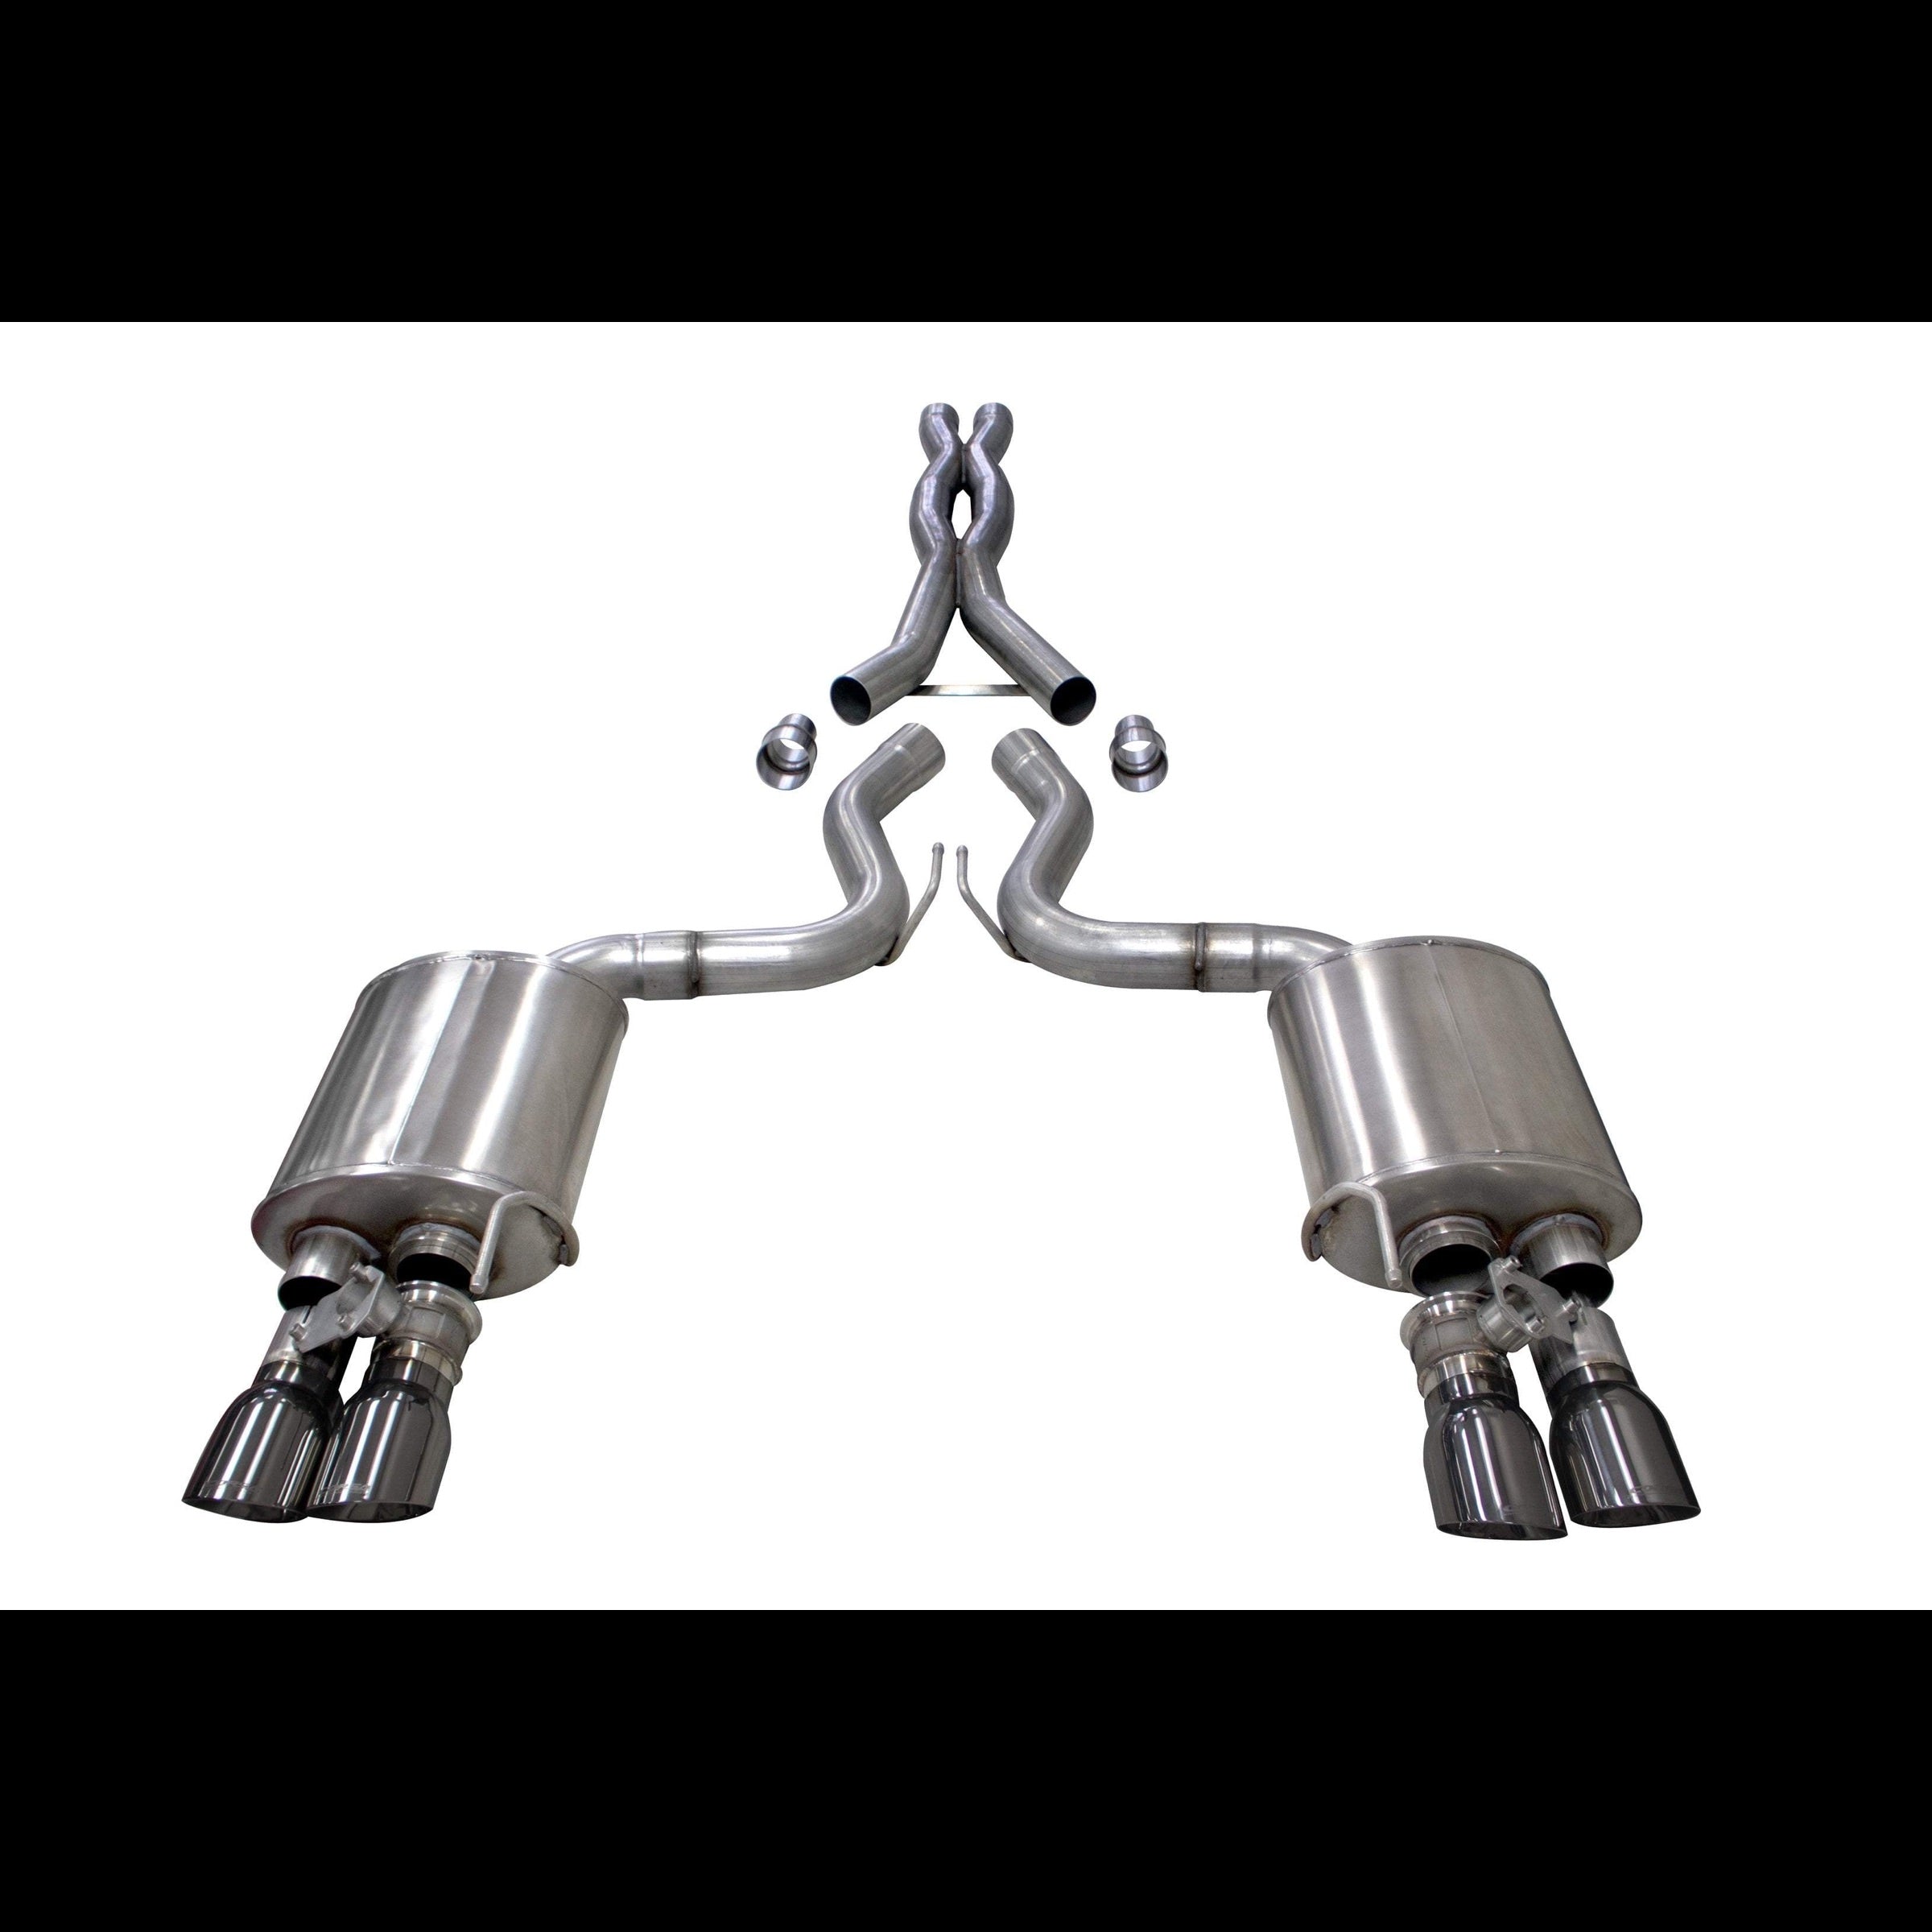 Ford Mustang Corsa stainless steel exhaust system